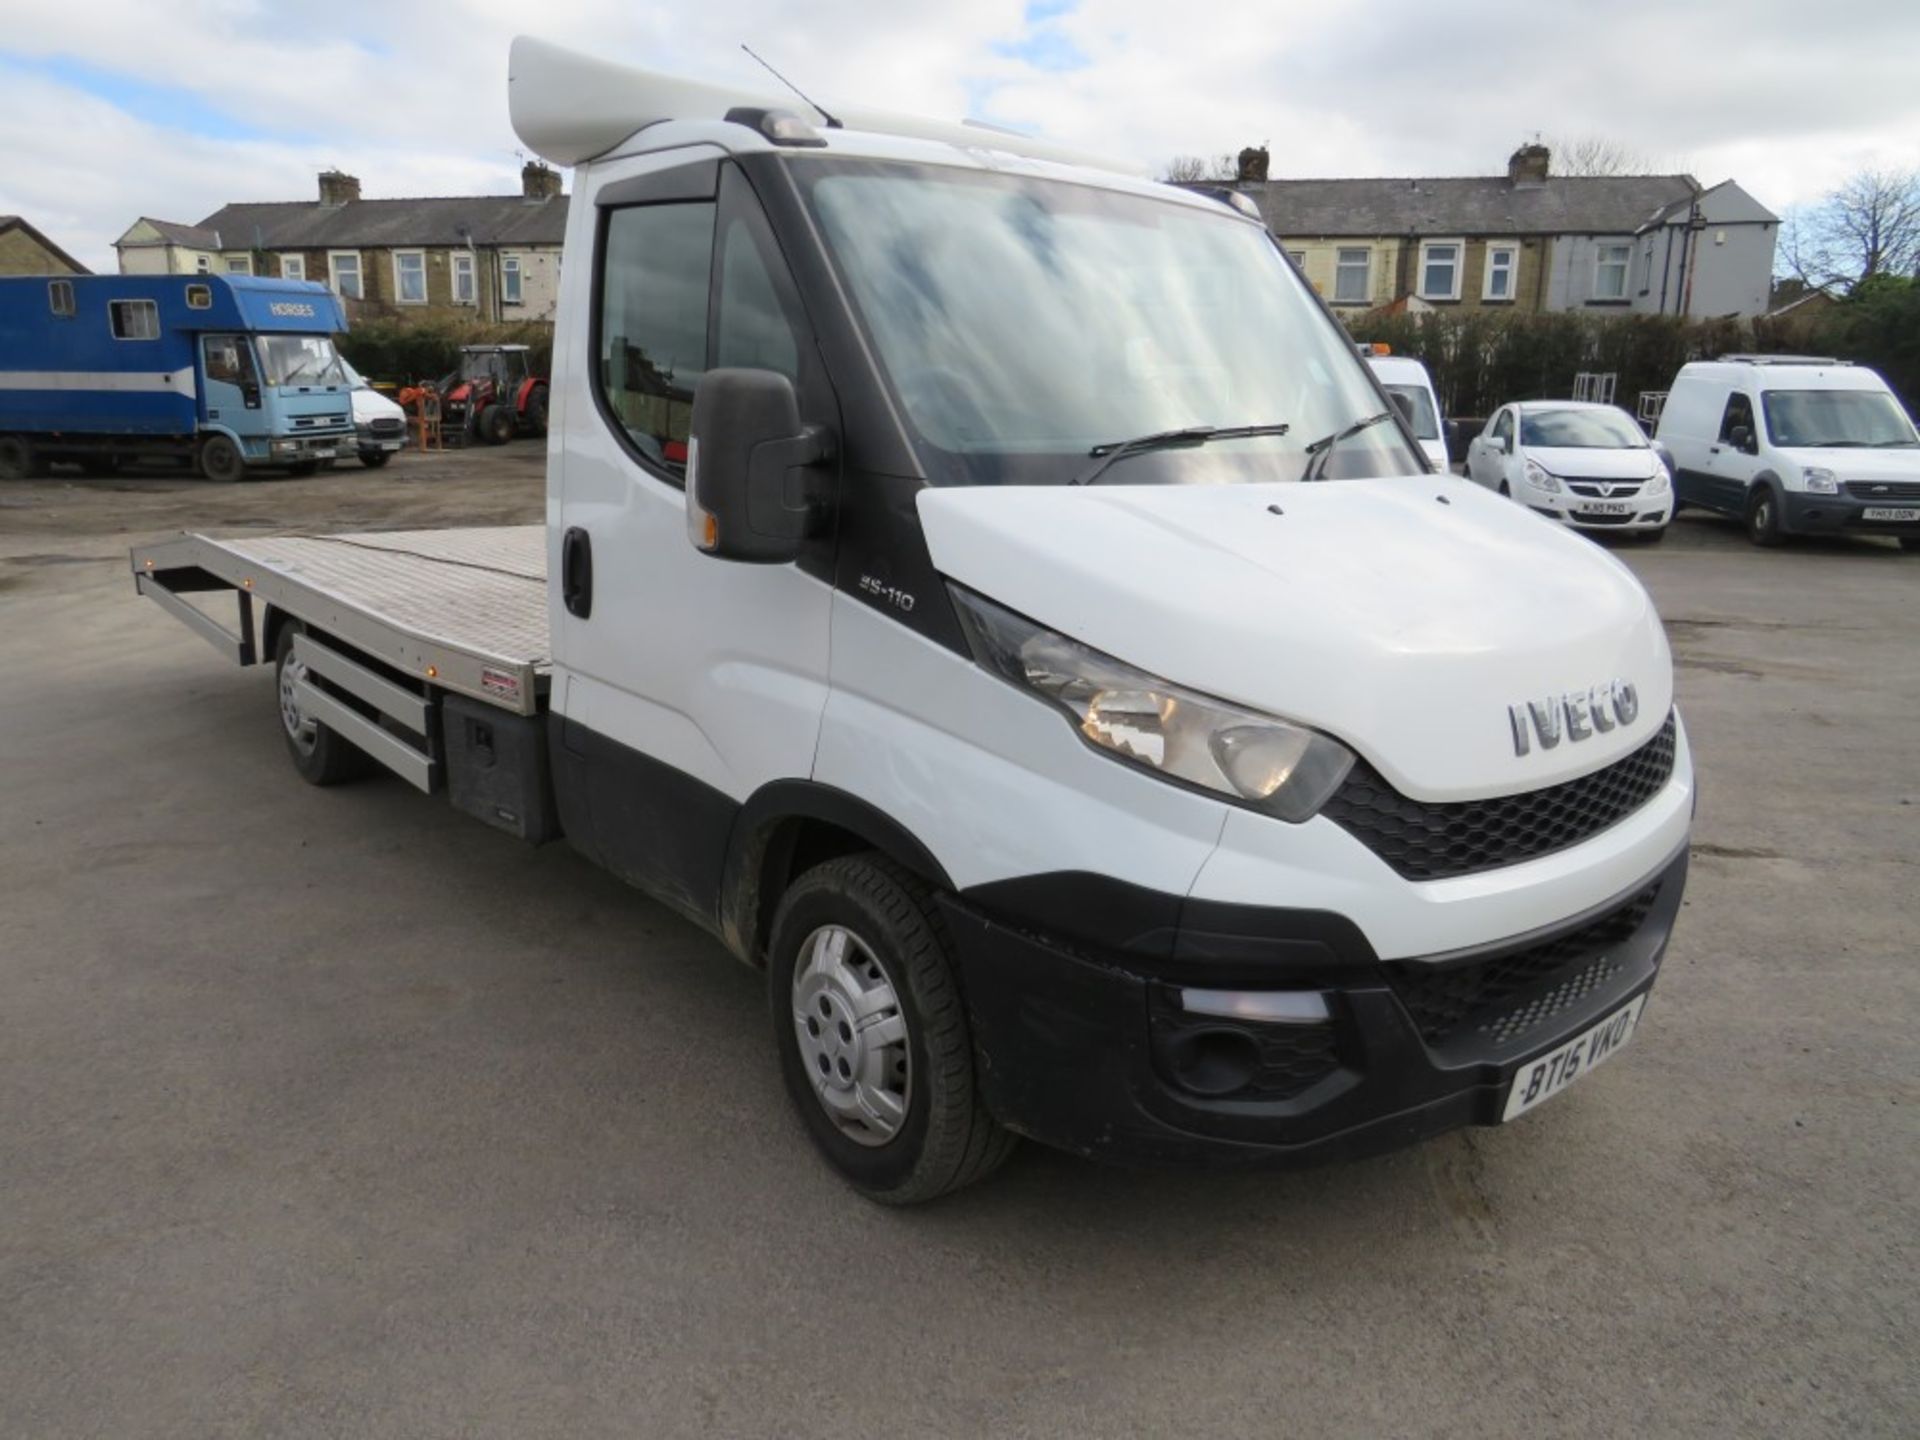 15 reg IVECO DAILY 35S11 RECOVERY TRUCK, 1ST REG 06/15, TEST 05/21, 123997M, V5 HERE, 1 FORMER